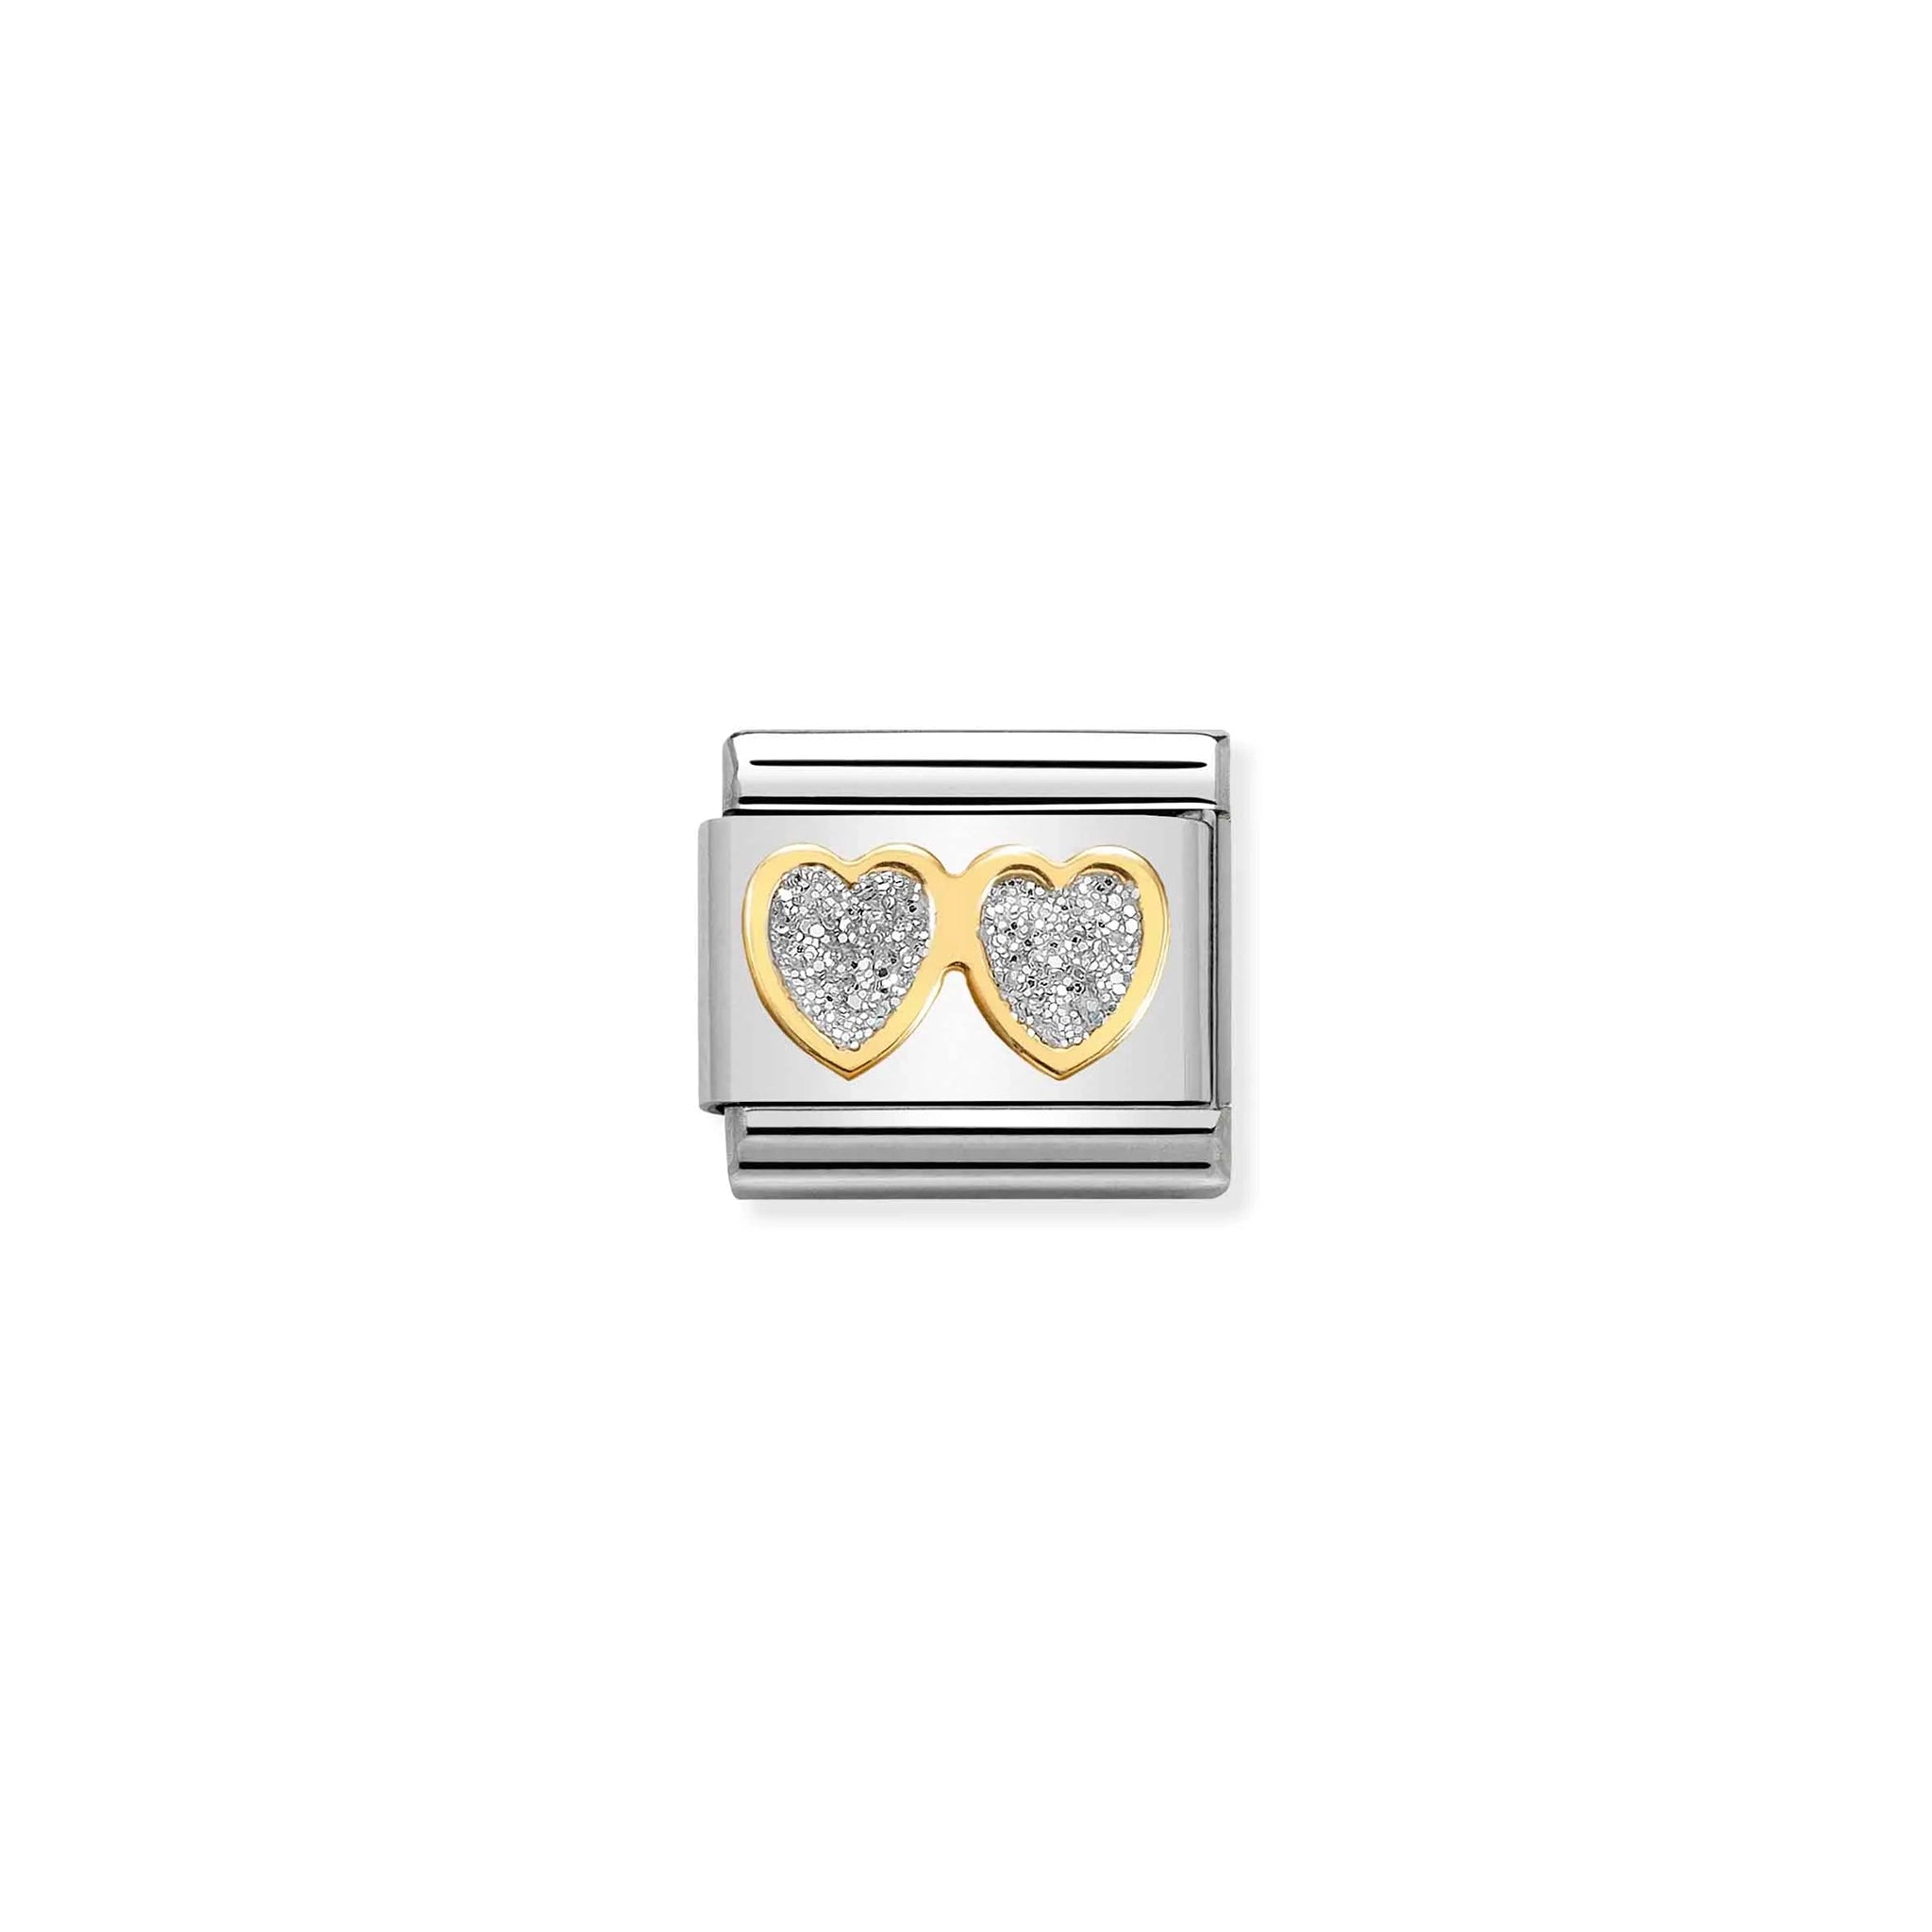 A Nomination charm link featuring two gold hearts with silver glitter centres